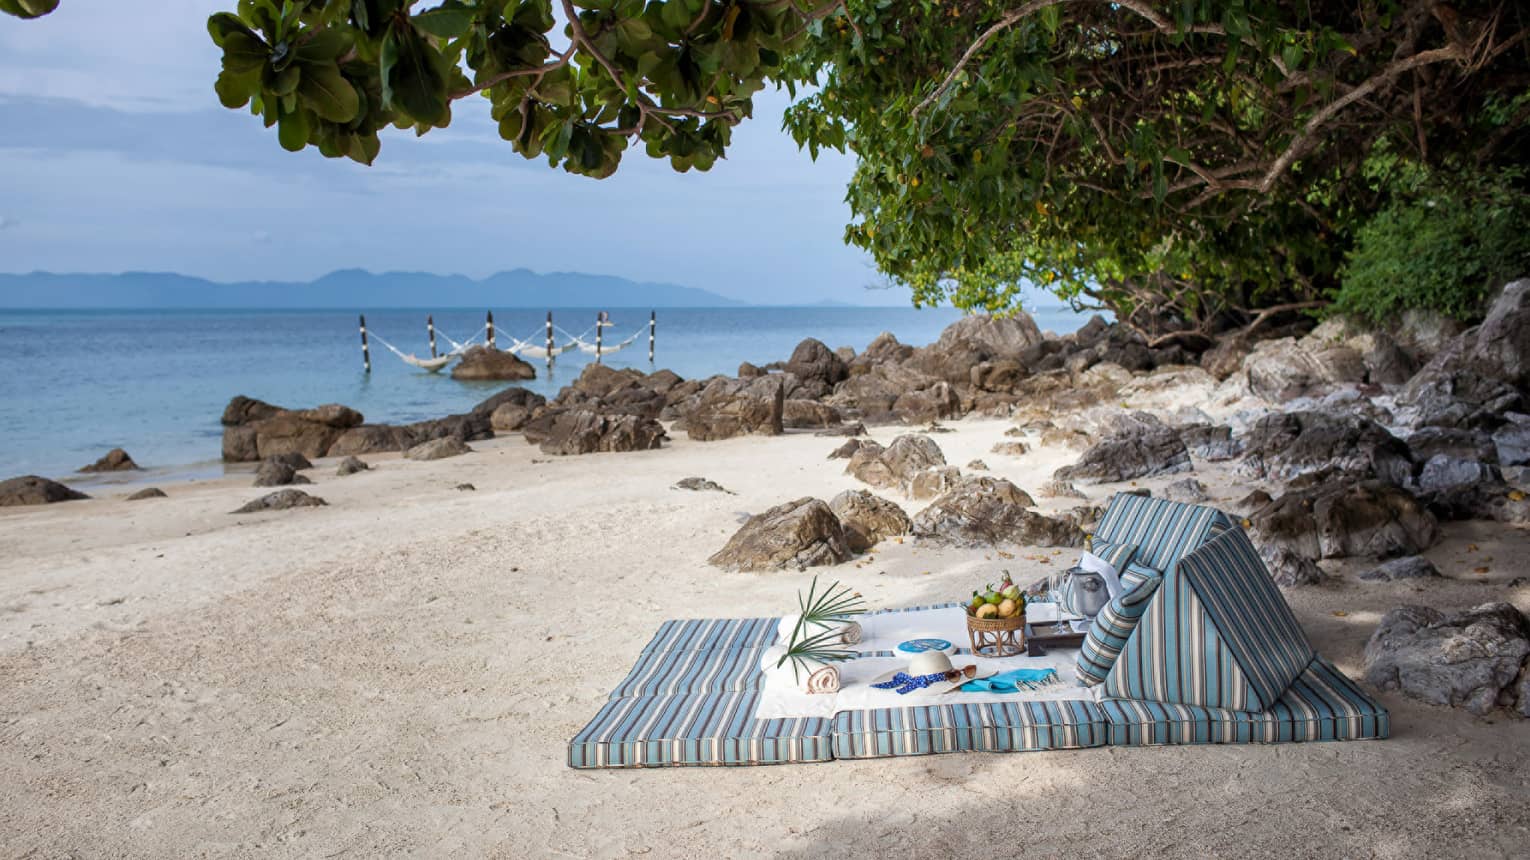 Striped cushions on white sand beach under tree with hat, fresh fruit, towels